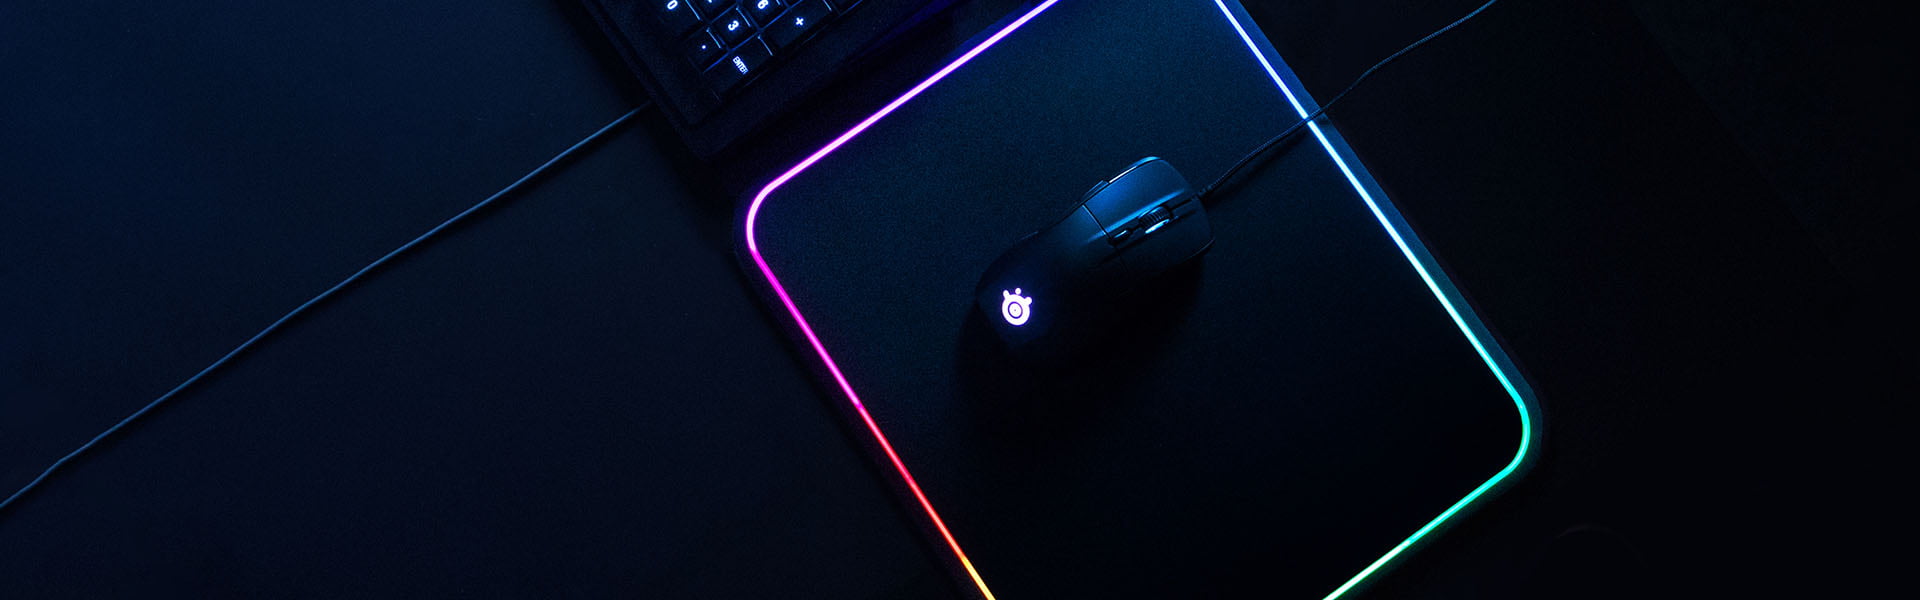 SteelSeries Introduced the First Dual-Surface RGB Illuminated Mousepad - The QcK Prism 13